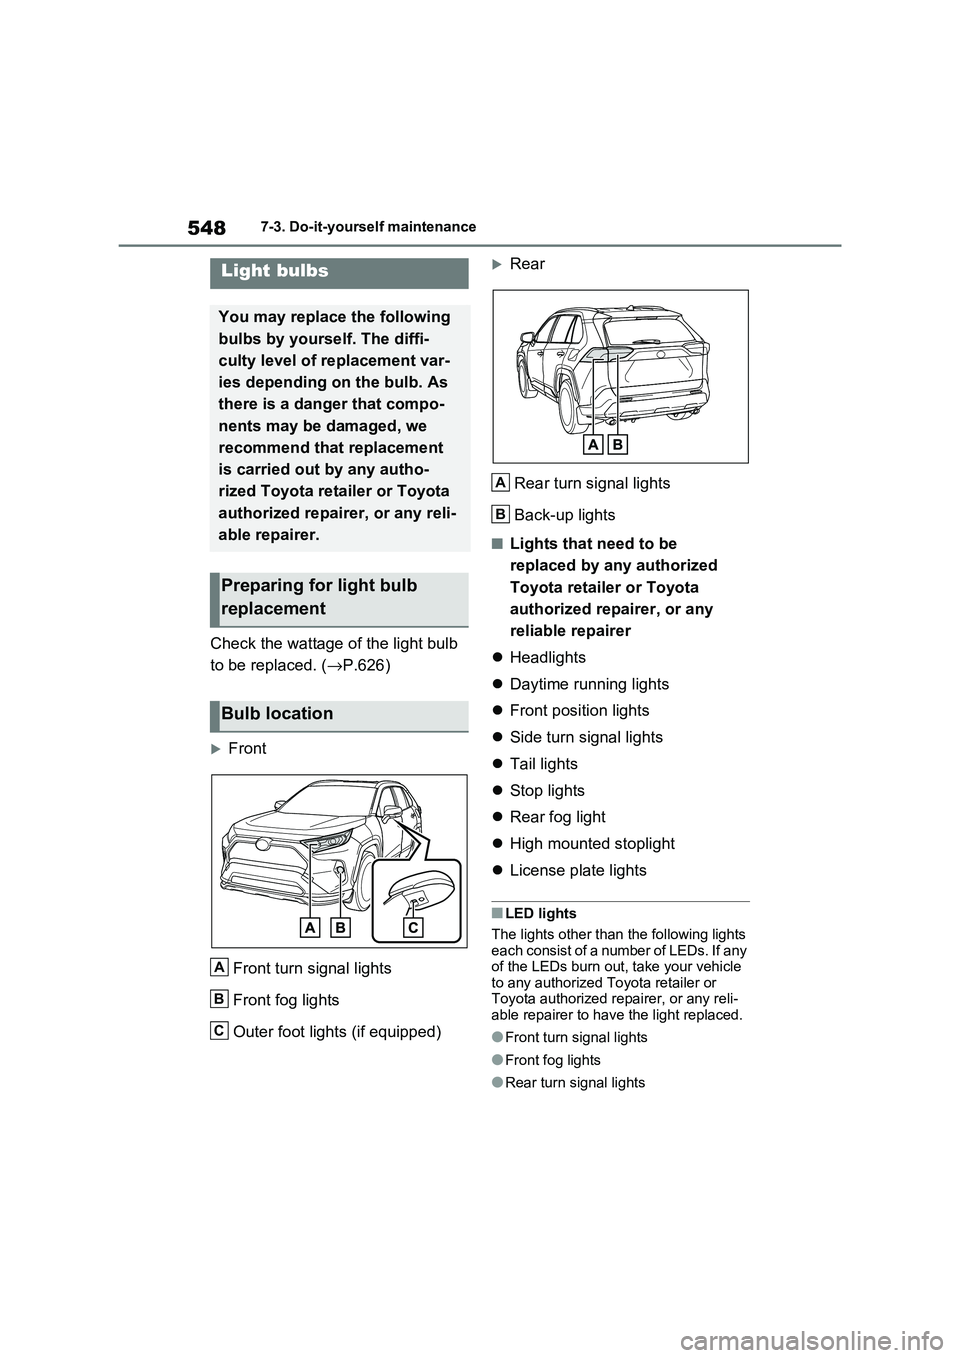 TOYOTA RAV4 PHEV 2021  Owners Manual 5487-3. Do-it-yourself maintenance
Check the wattage of the light bulb  
to be replaced. ( →P.626)
Front 
Front turn signal lights 
Front fog lights
Outer foot lights (if equipped)
Rear 
Rear 